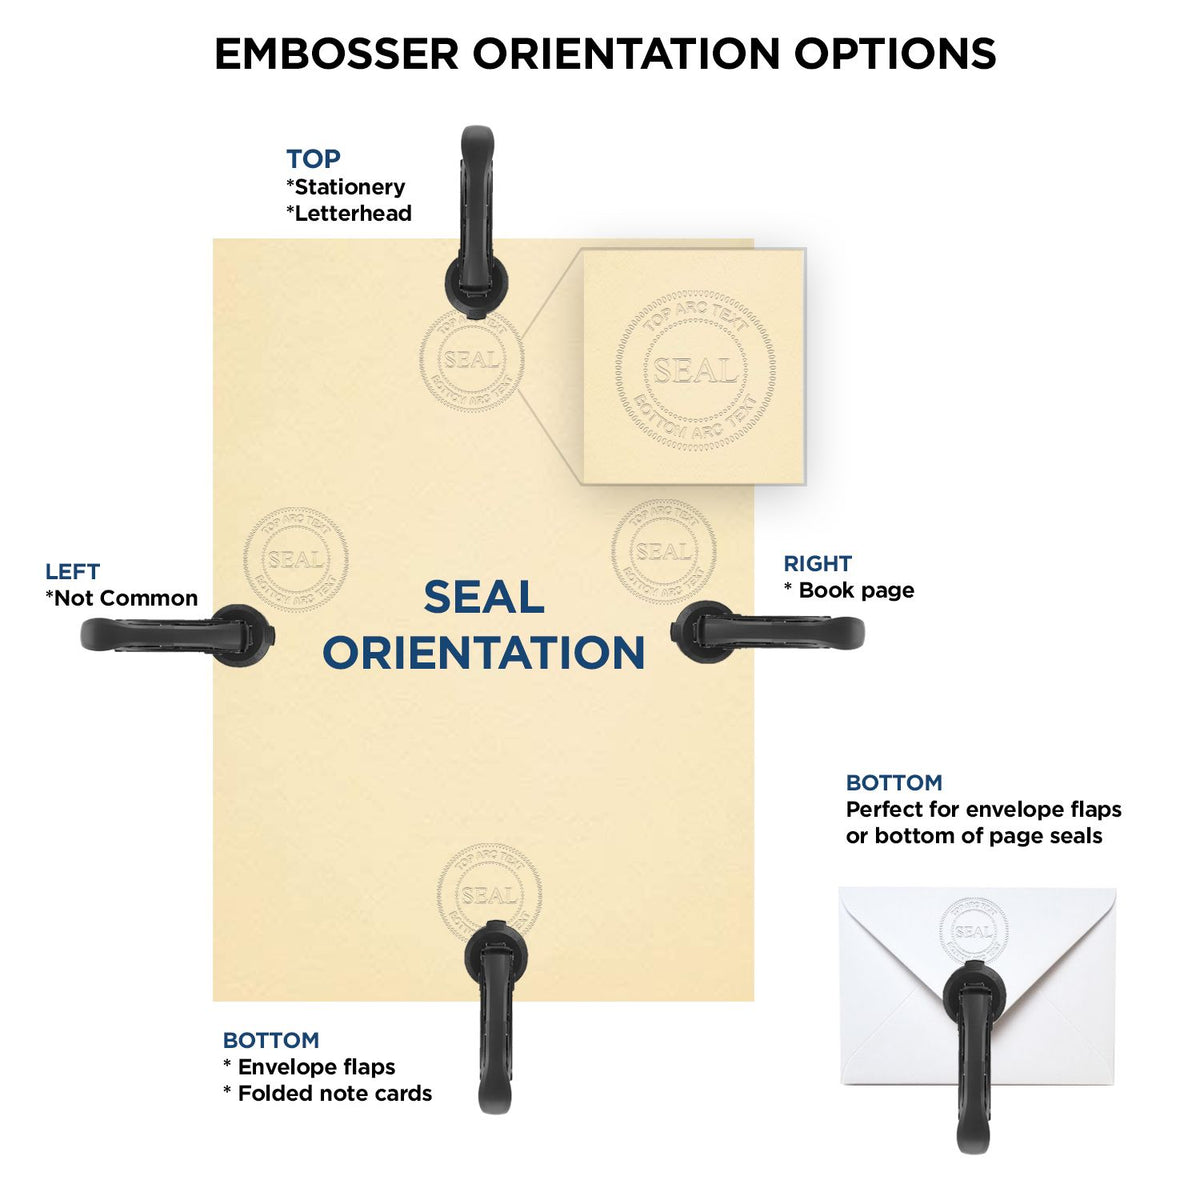 An infographic for the State of New York Extended Long Reach Engineer Seal showing embosser orientation, this is showing examples of a top, bottom, right and left insert.